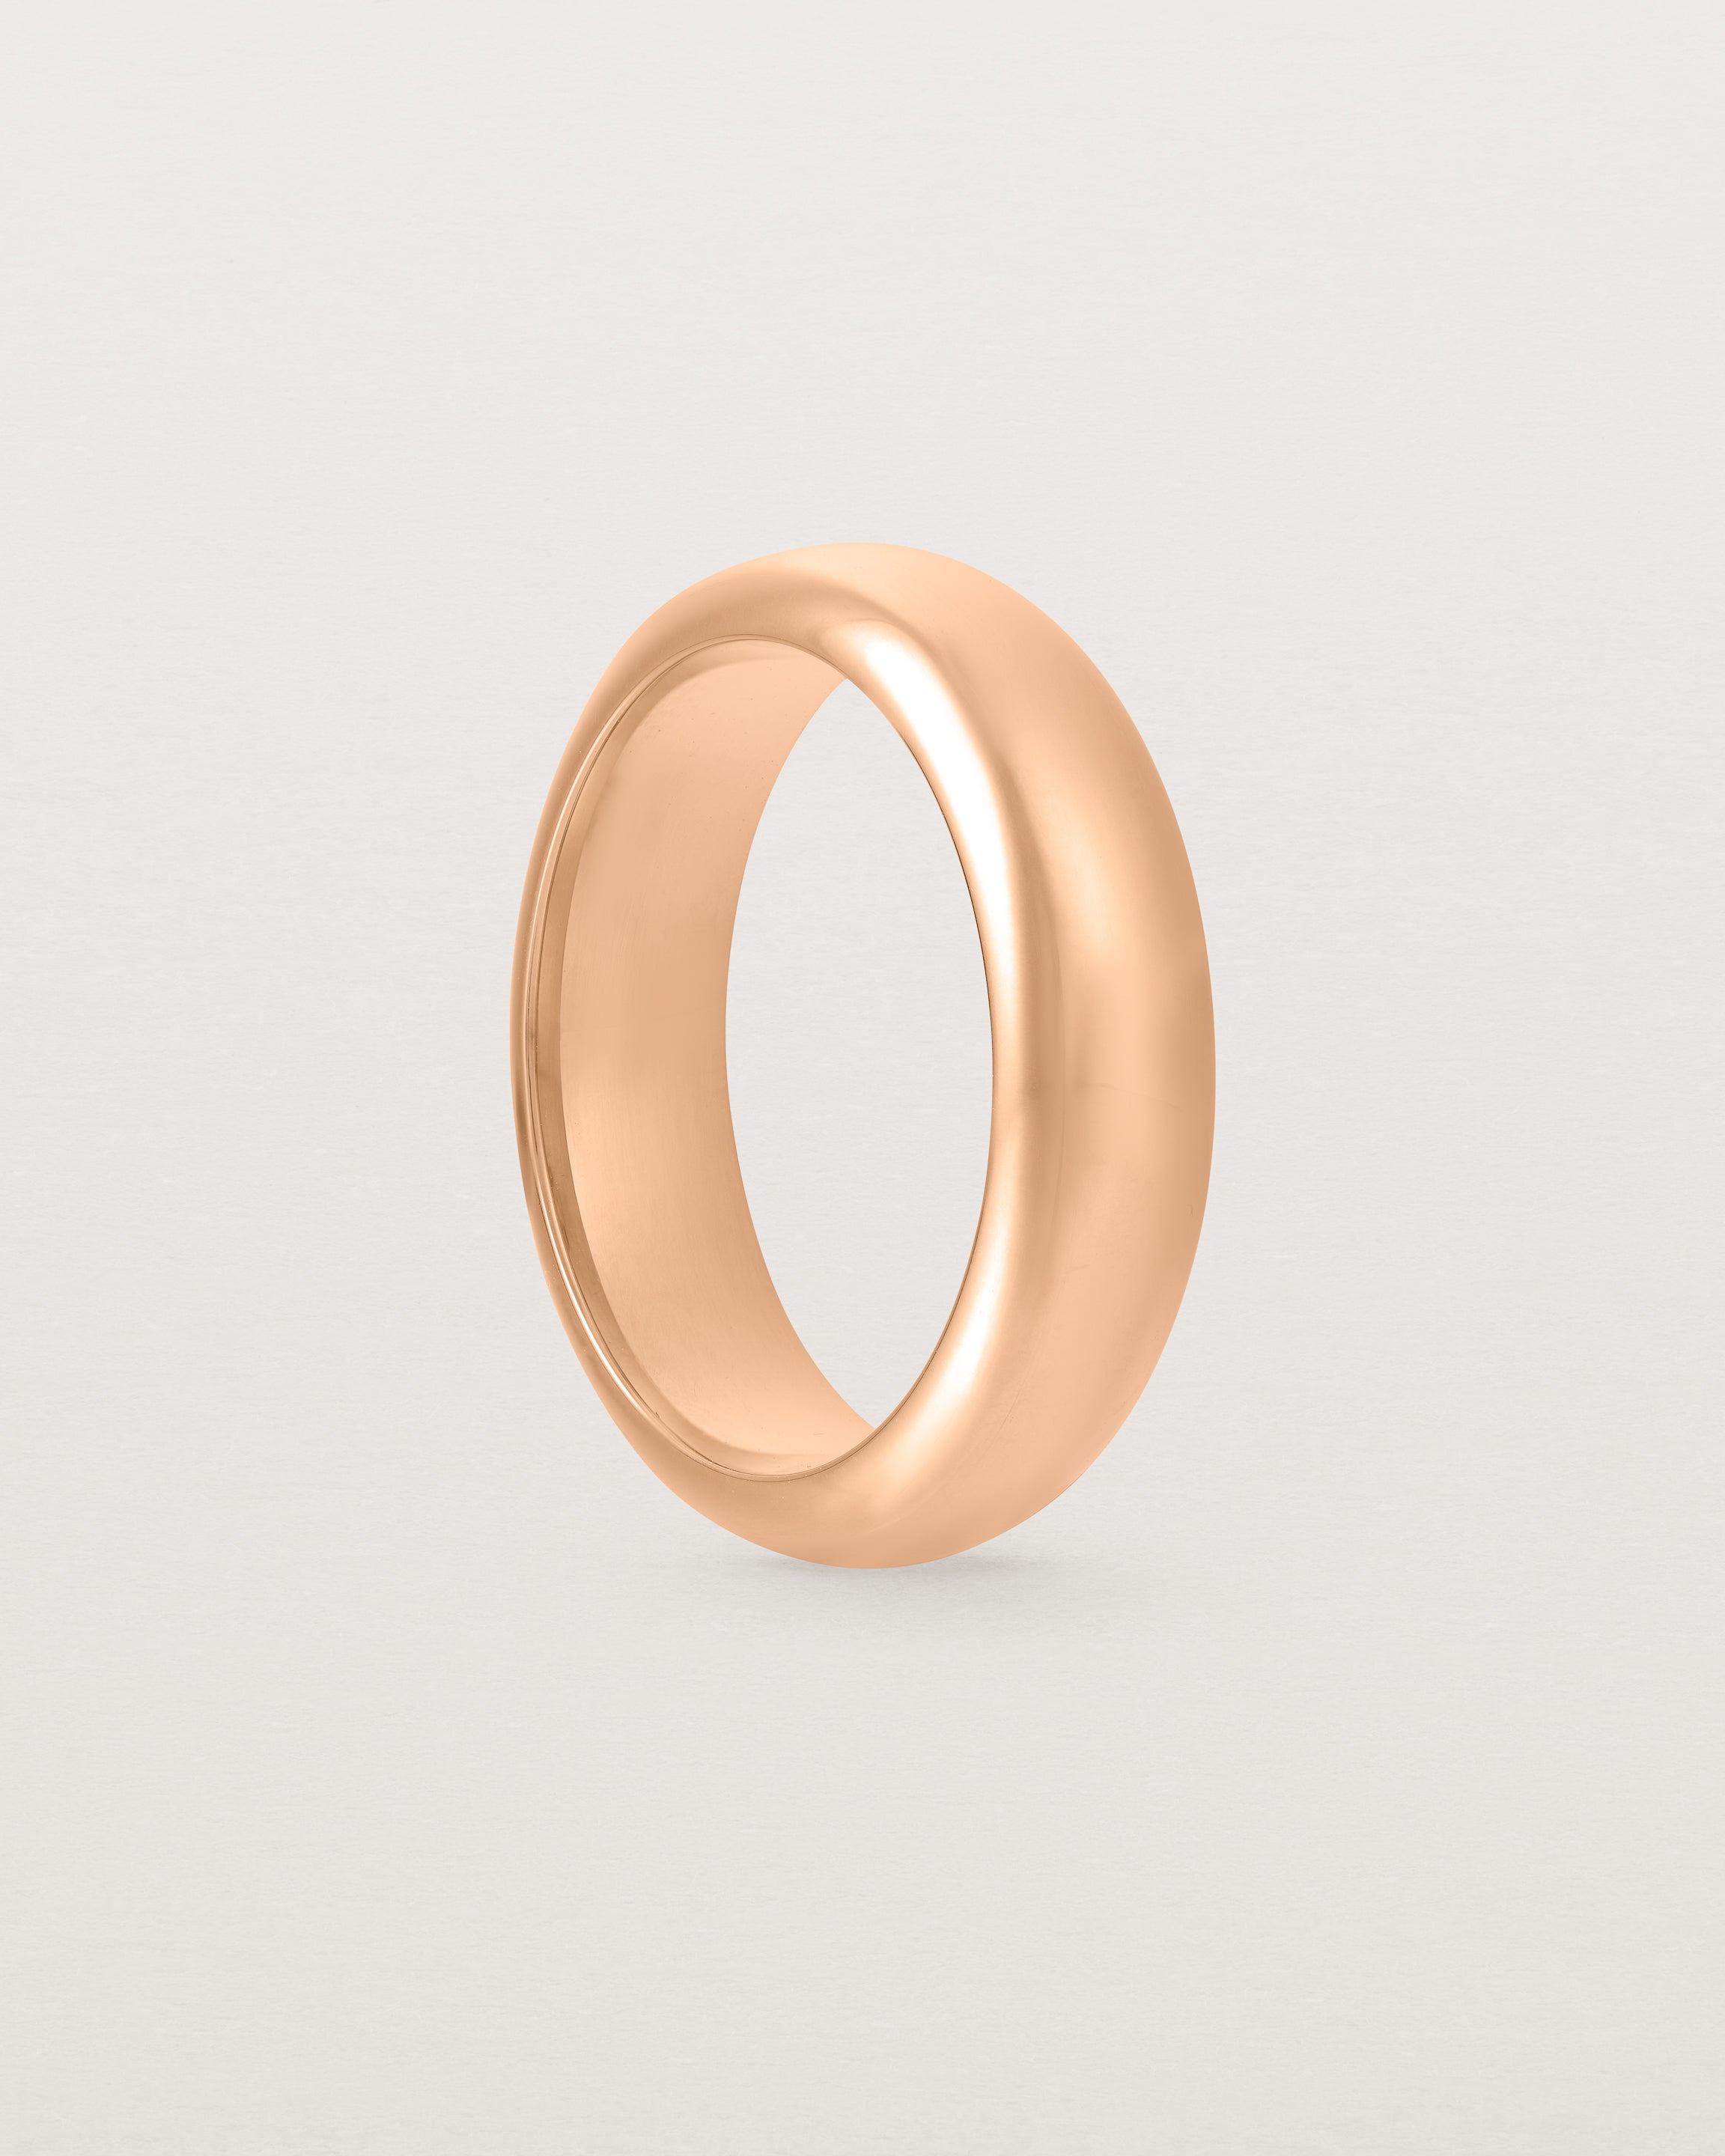 Standing view of the Bold Curve Ring | 6mm | Rose Gold.